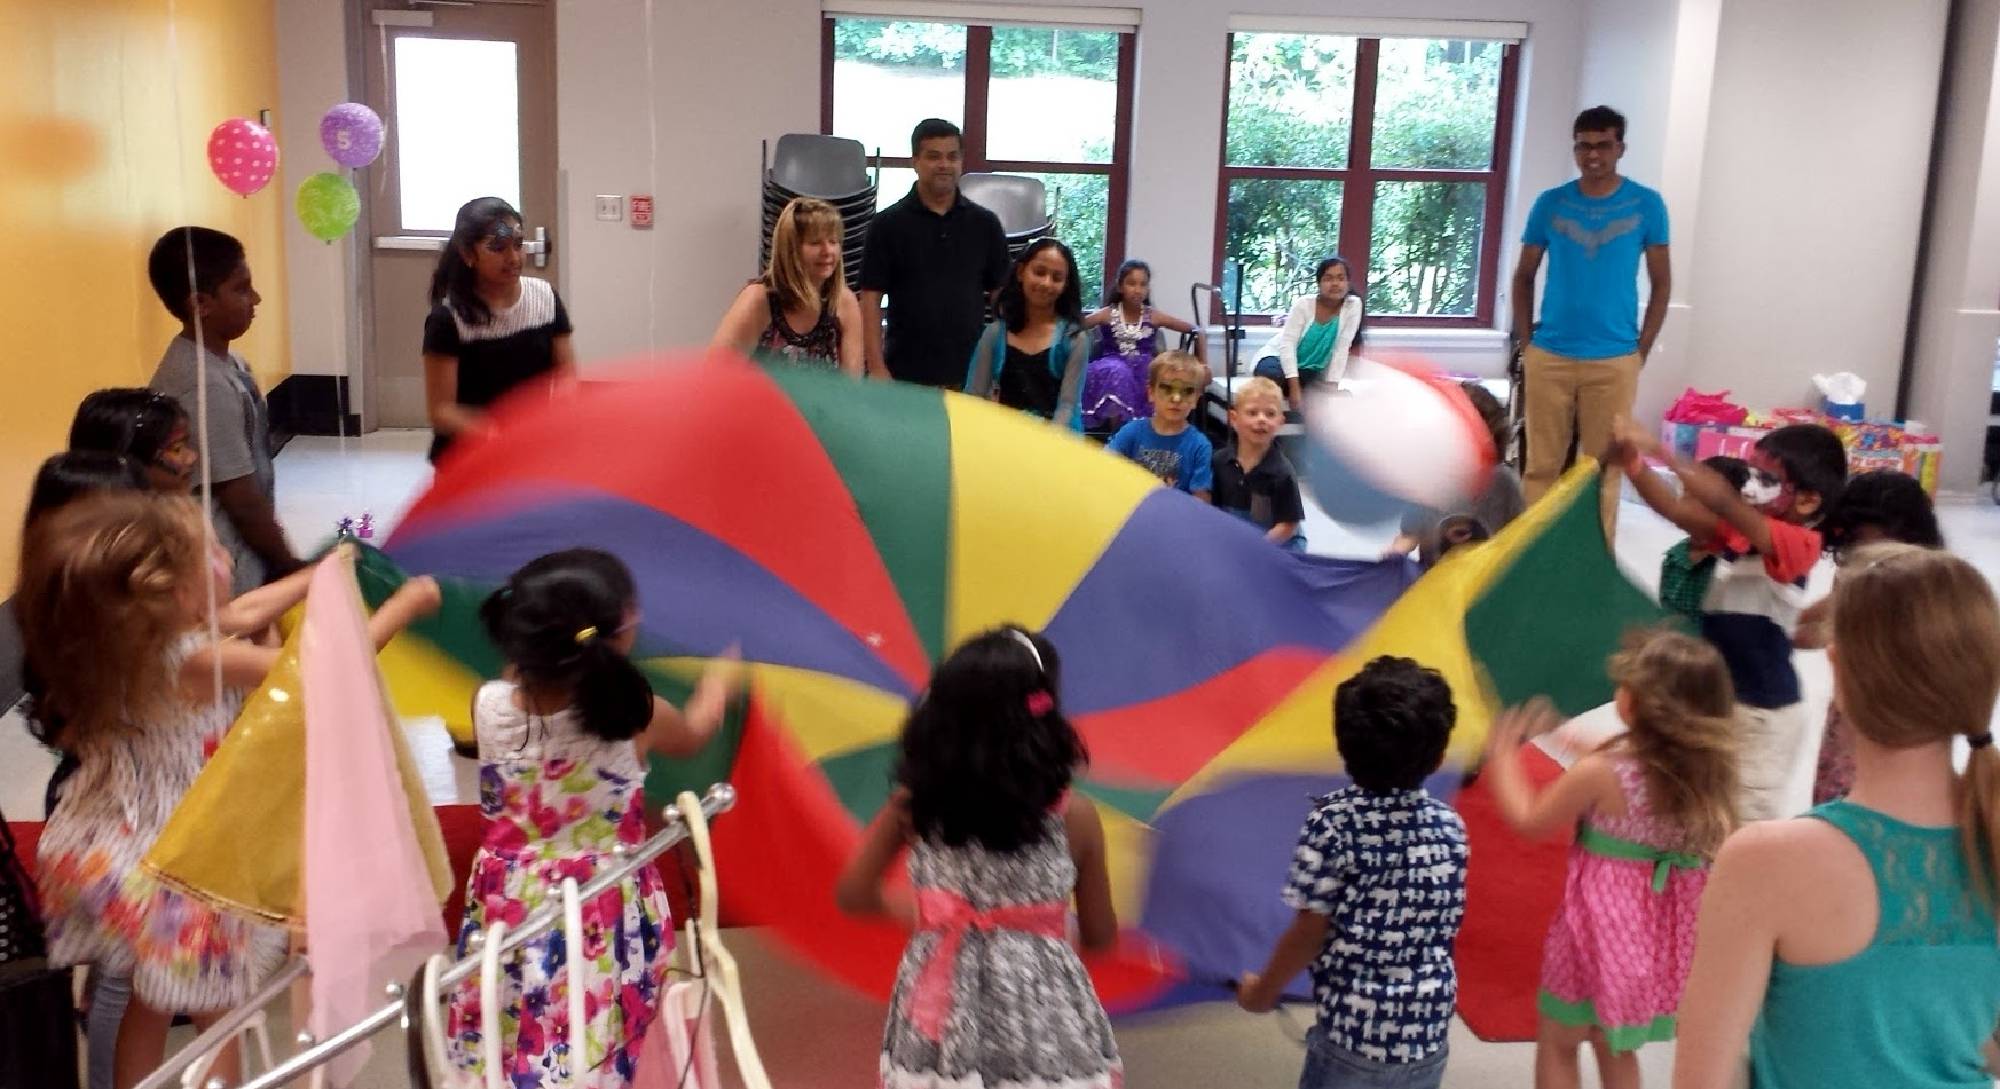 Parachute and games at the Apex Community Center